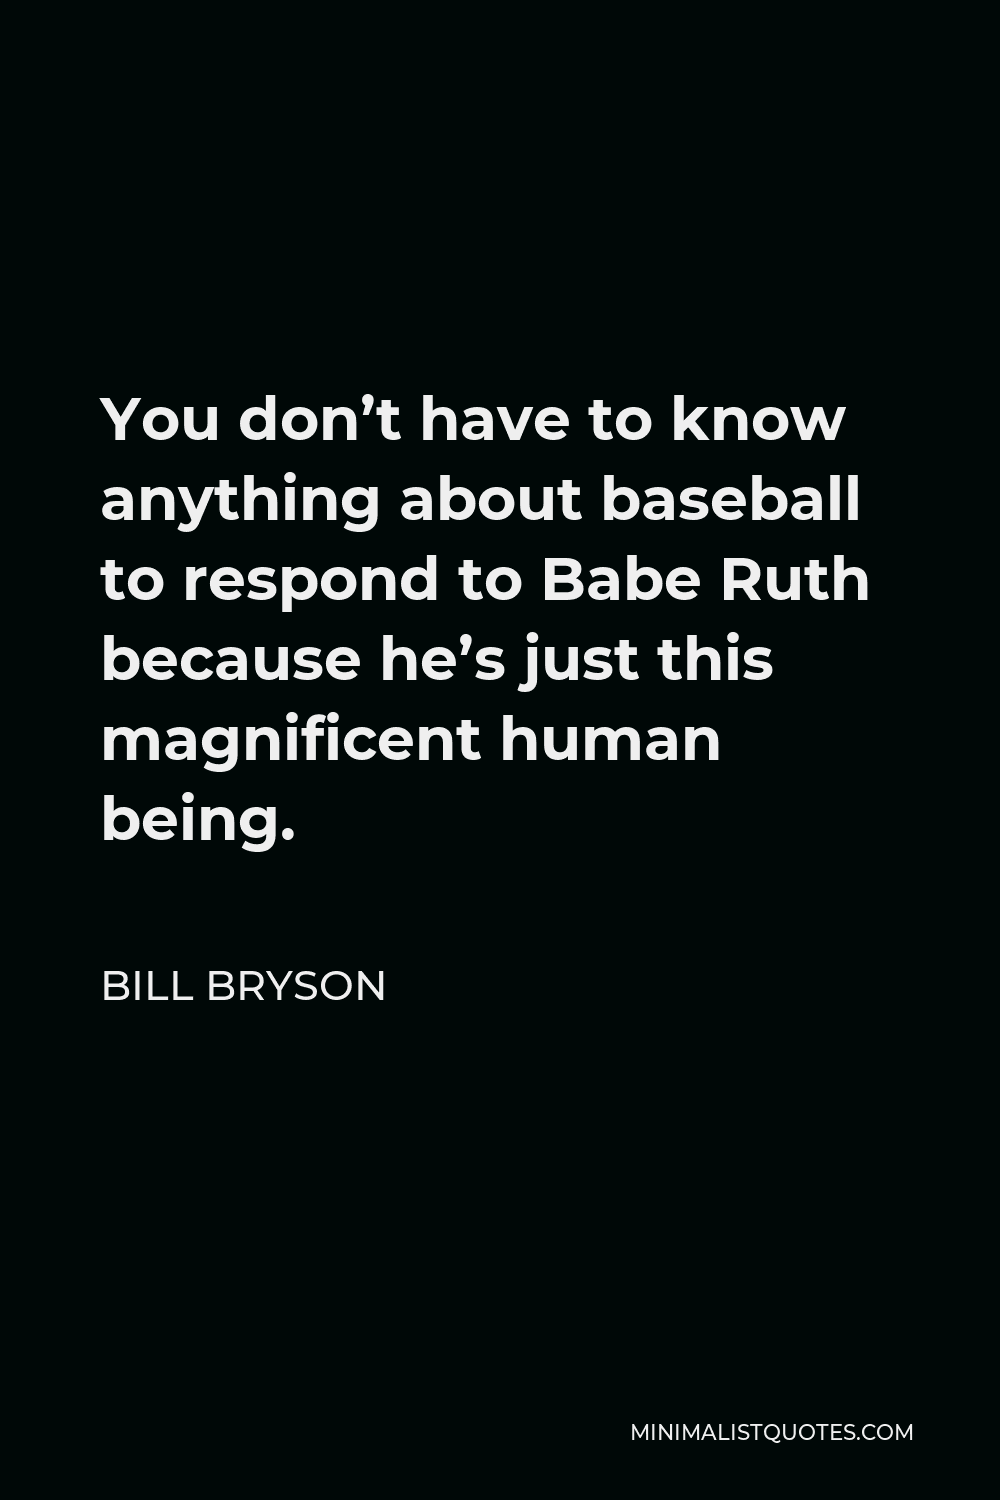 Bill Bryson Quote - You don’t have to know anything about baseball to respond to Babe Ruth because he’s just this magnificent human being.